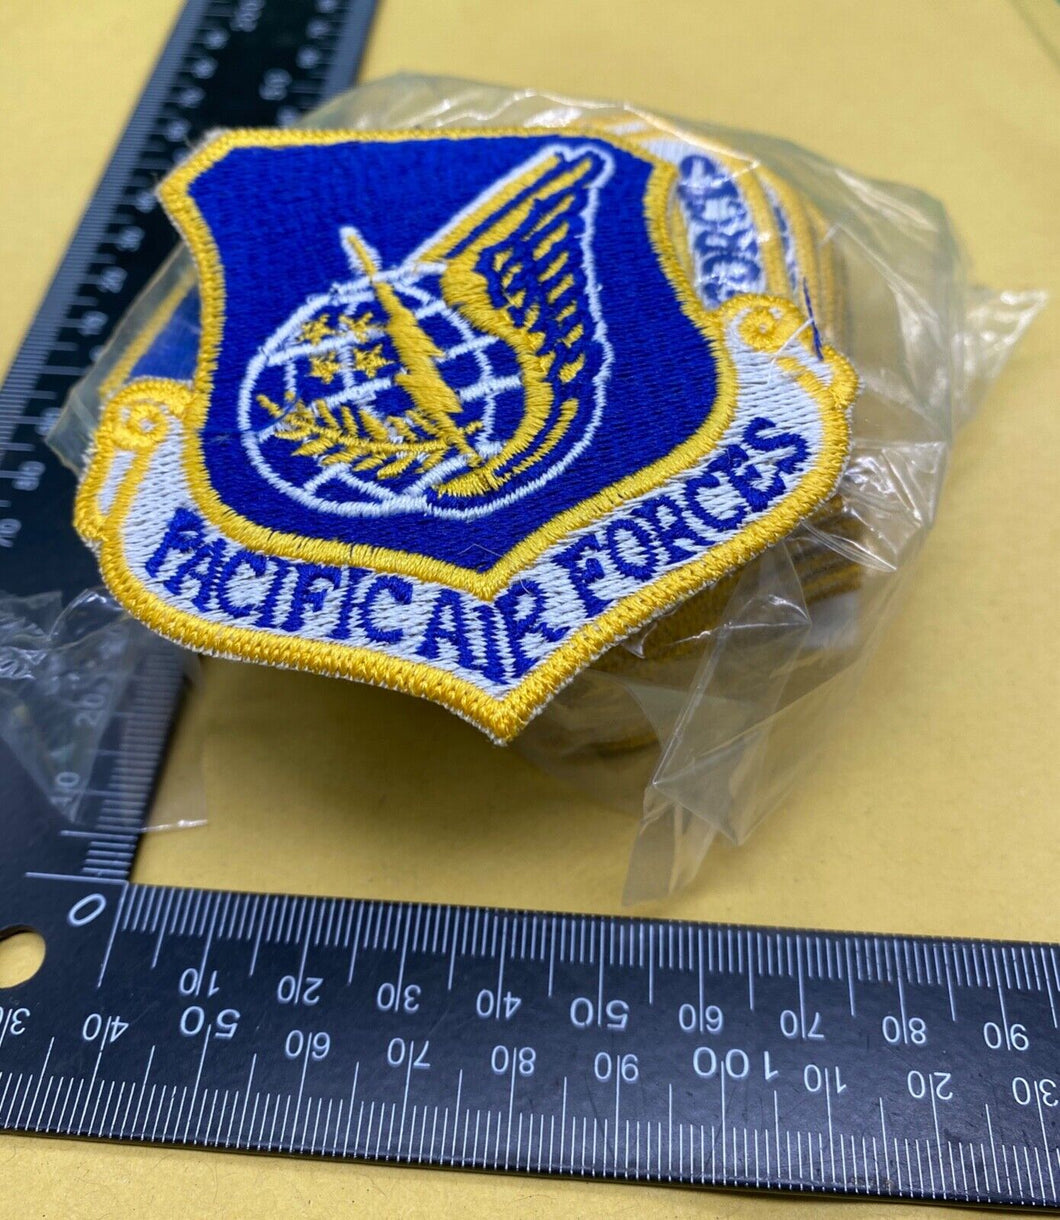 An original US Air Force PACIFIC AIR FORCES Patch/Badge. Brand New - Unissued.